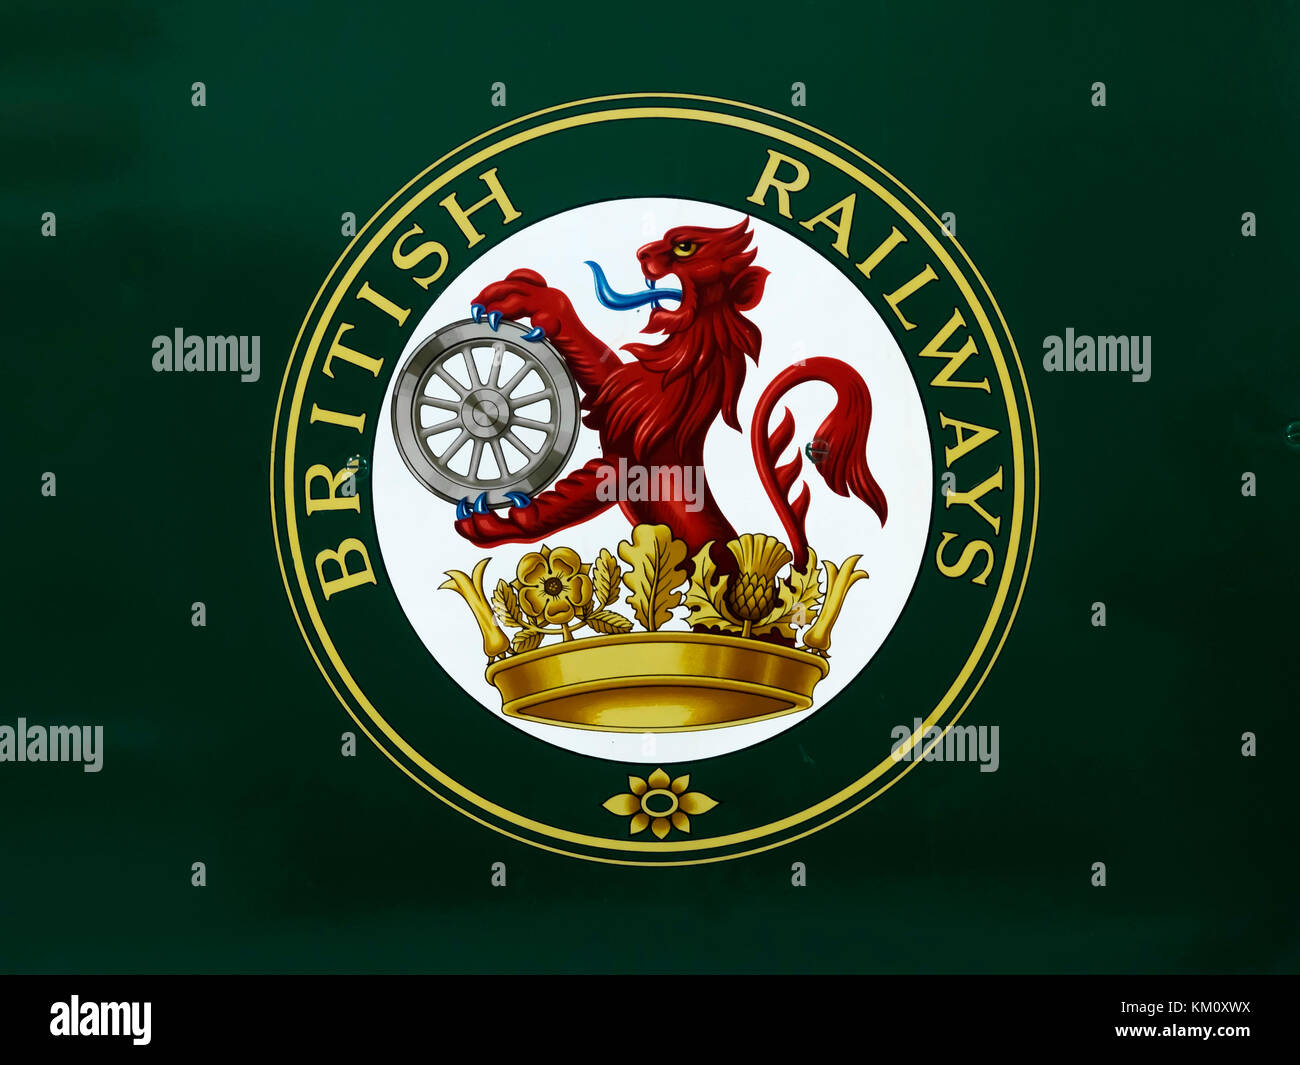 Logo of the former British Railways, 1948 - 1997 on the green background of an ex Southern Railway coach on display at the NRM Shildon UK Stock Photo